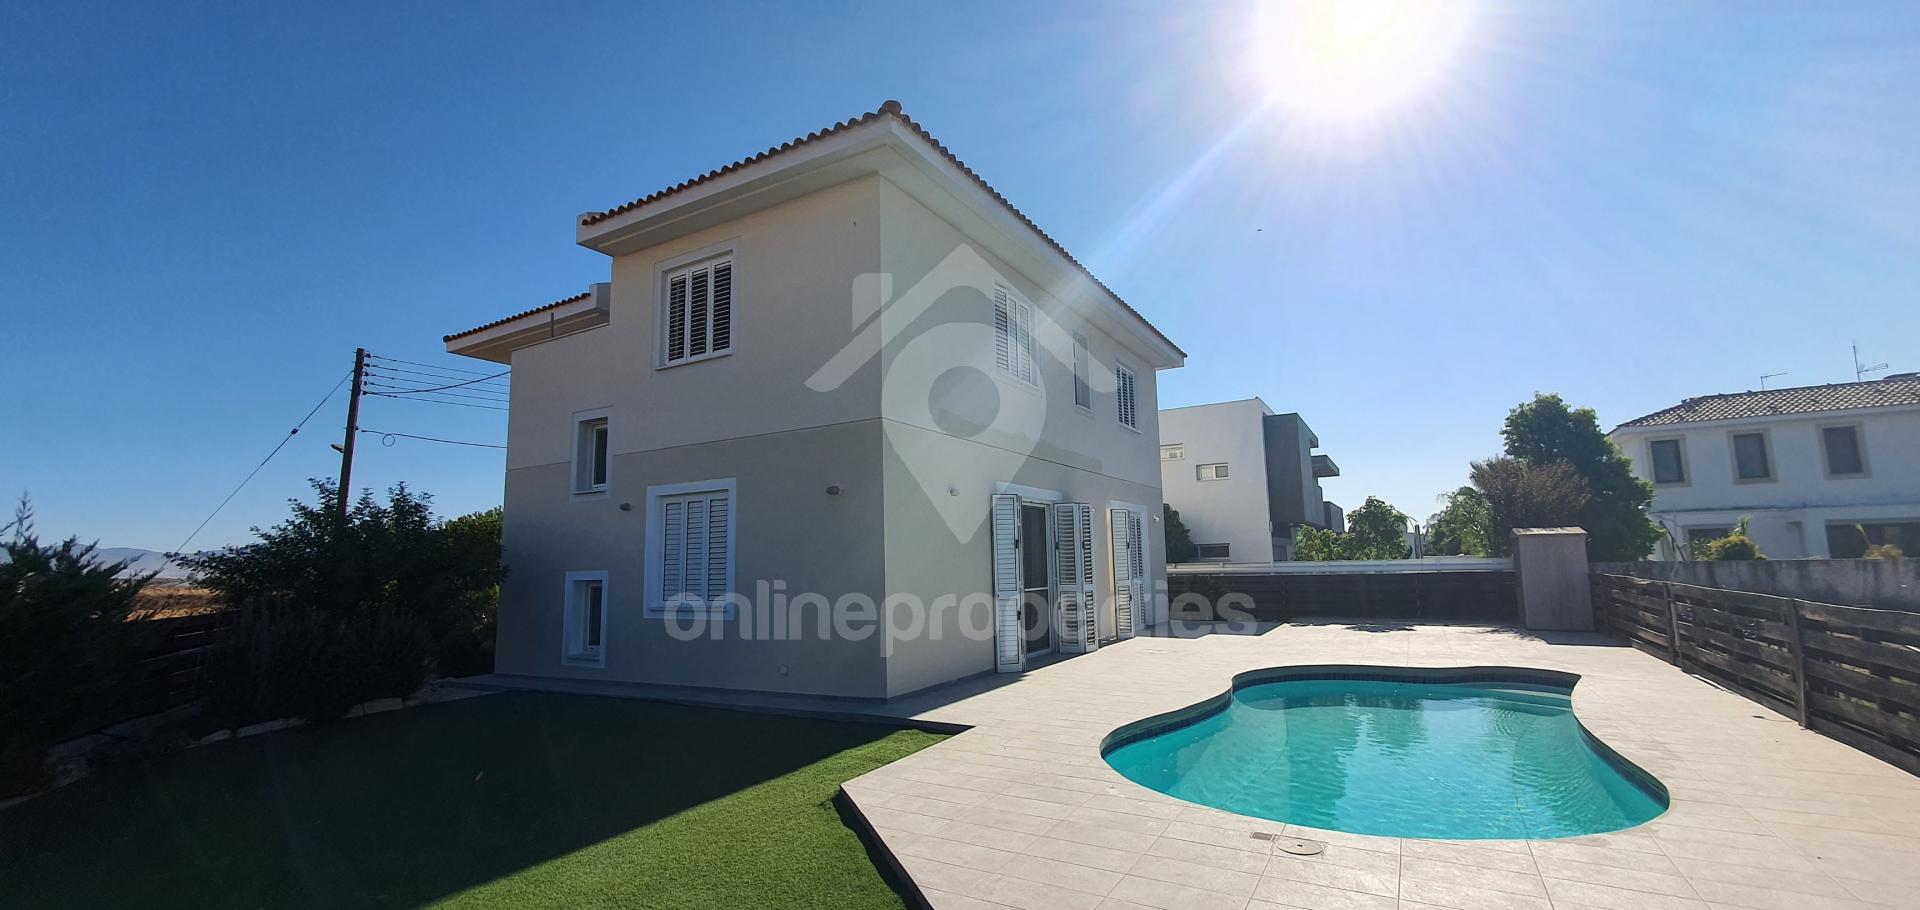 Spacious 4bedroom House with nice garden & pool